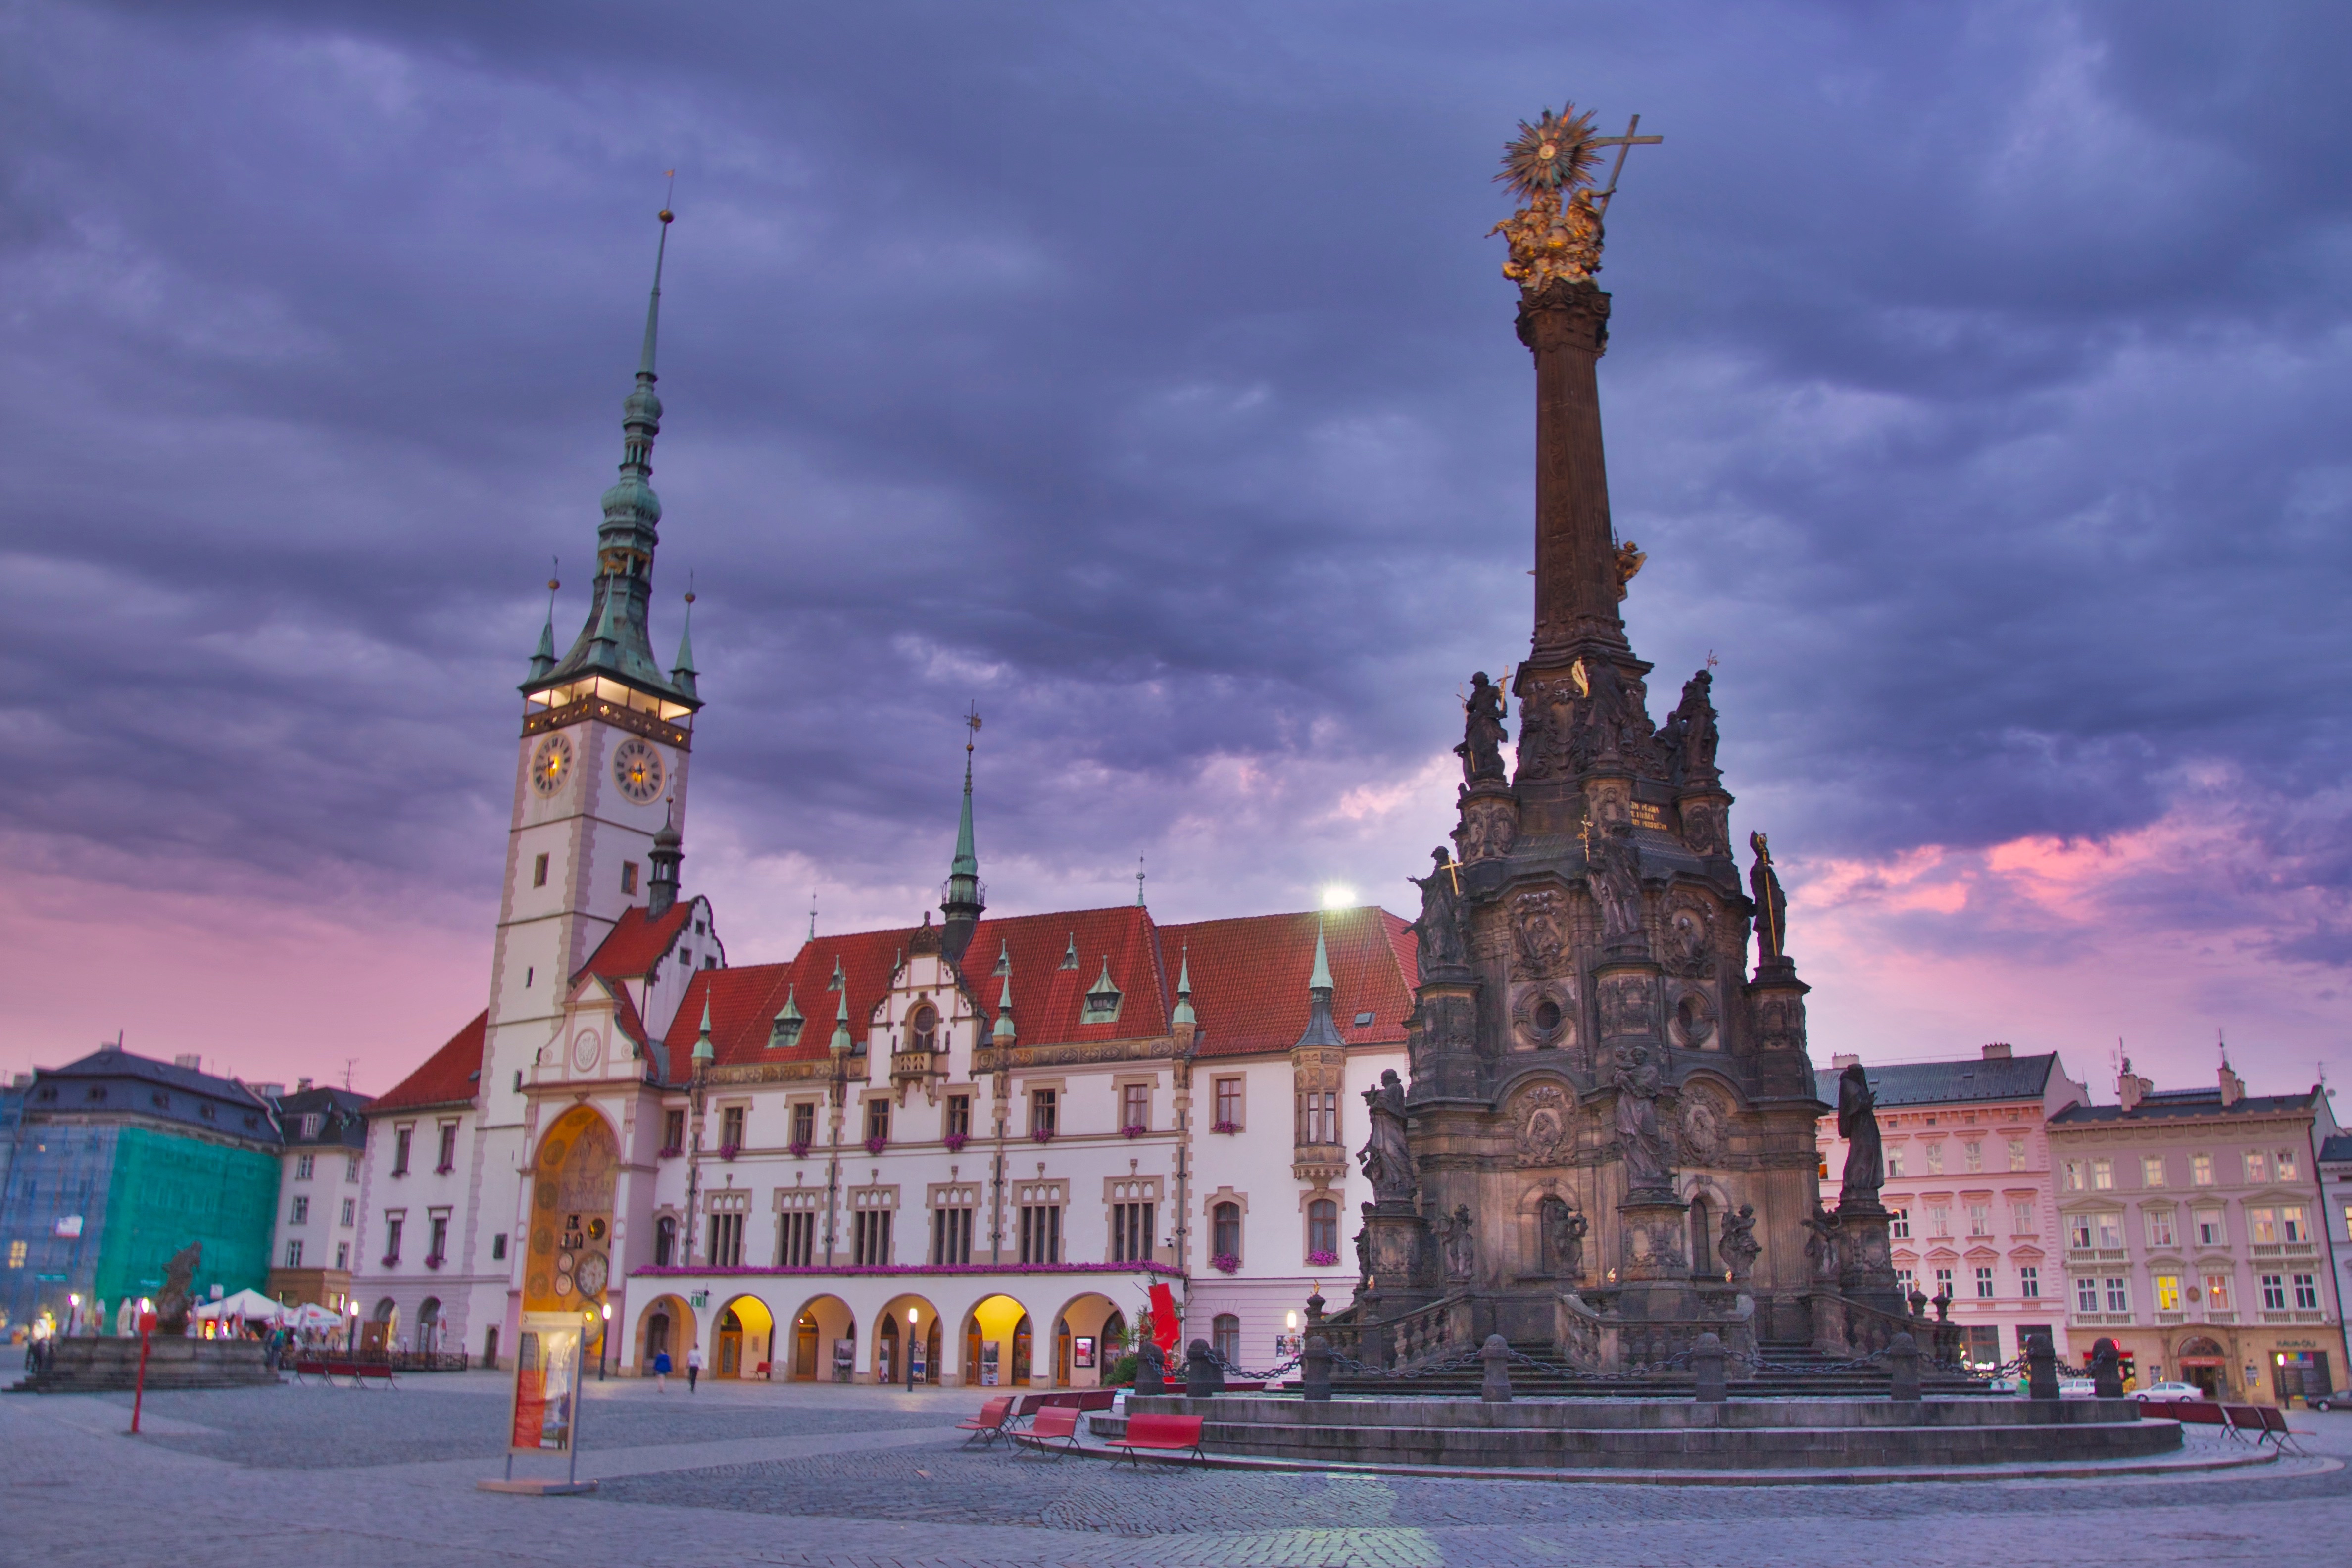 Olomouc is one of the most popular places in the Czech Republic to visit. The city features a variety of historical buildings and beautiful architecture. 